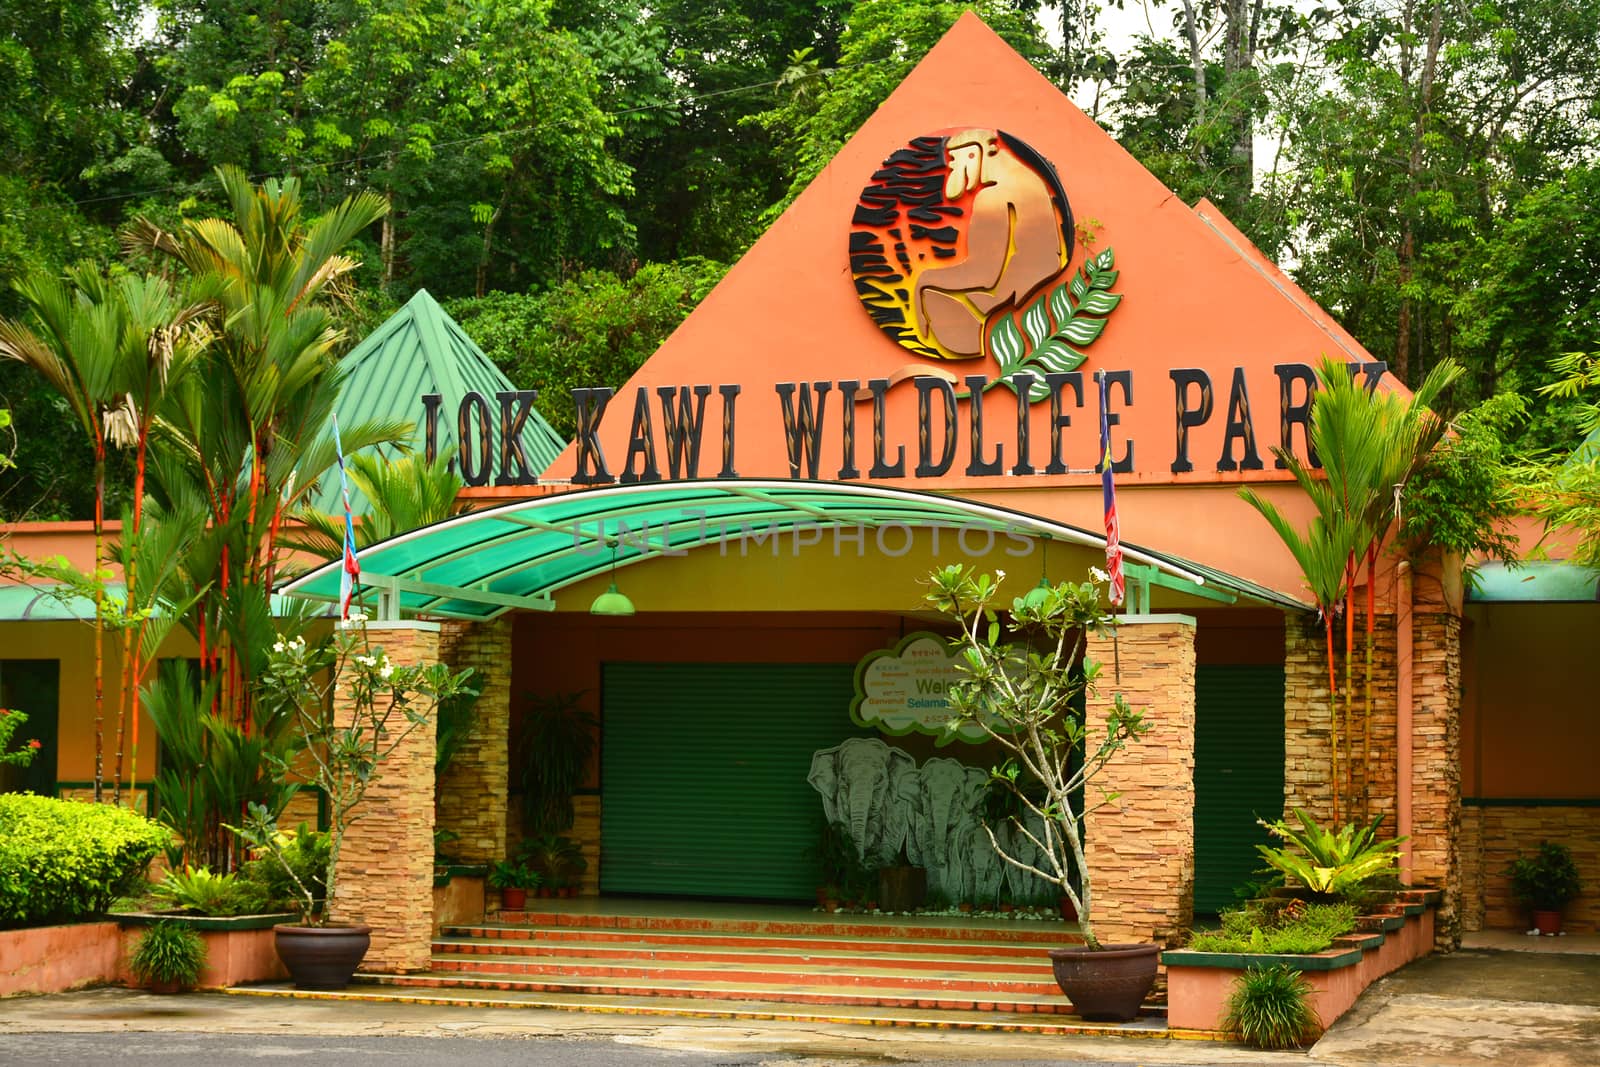 SABAH, MY - JUNE 20: Lok Kawi Wildlife Park facade on June 20, 2016 in Sabah, Malaysia. Lok Kawi Wildlife Park covers about 280 acres of land which includes the Botanical Site and the Zoological Site.